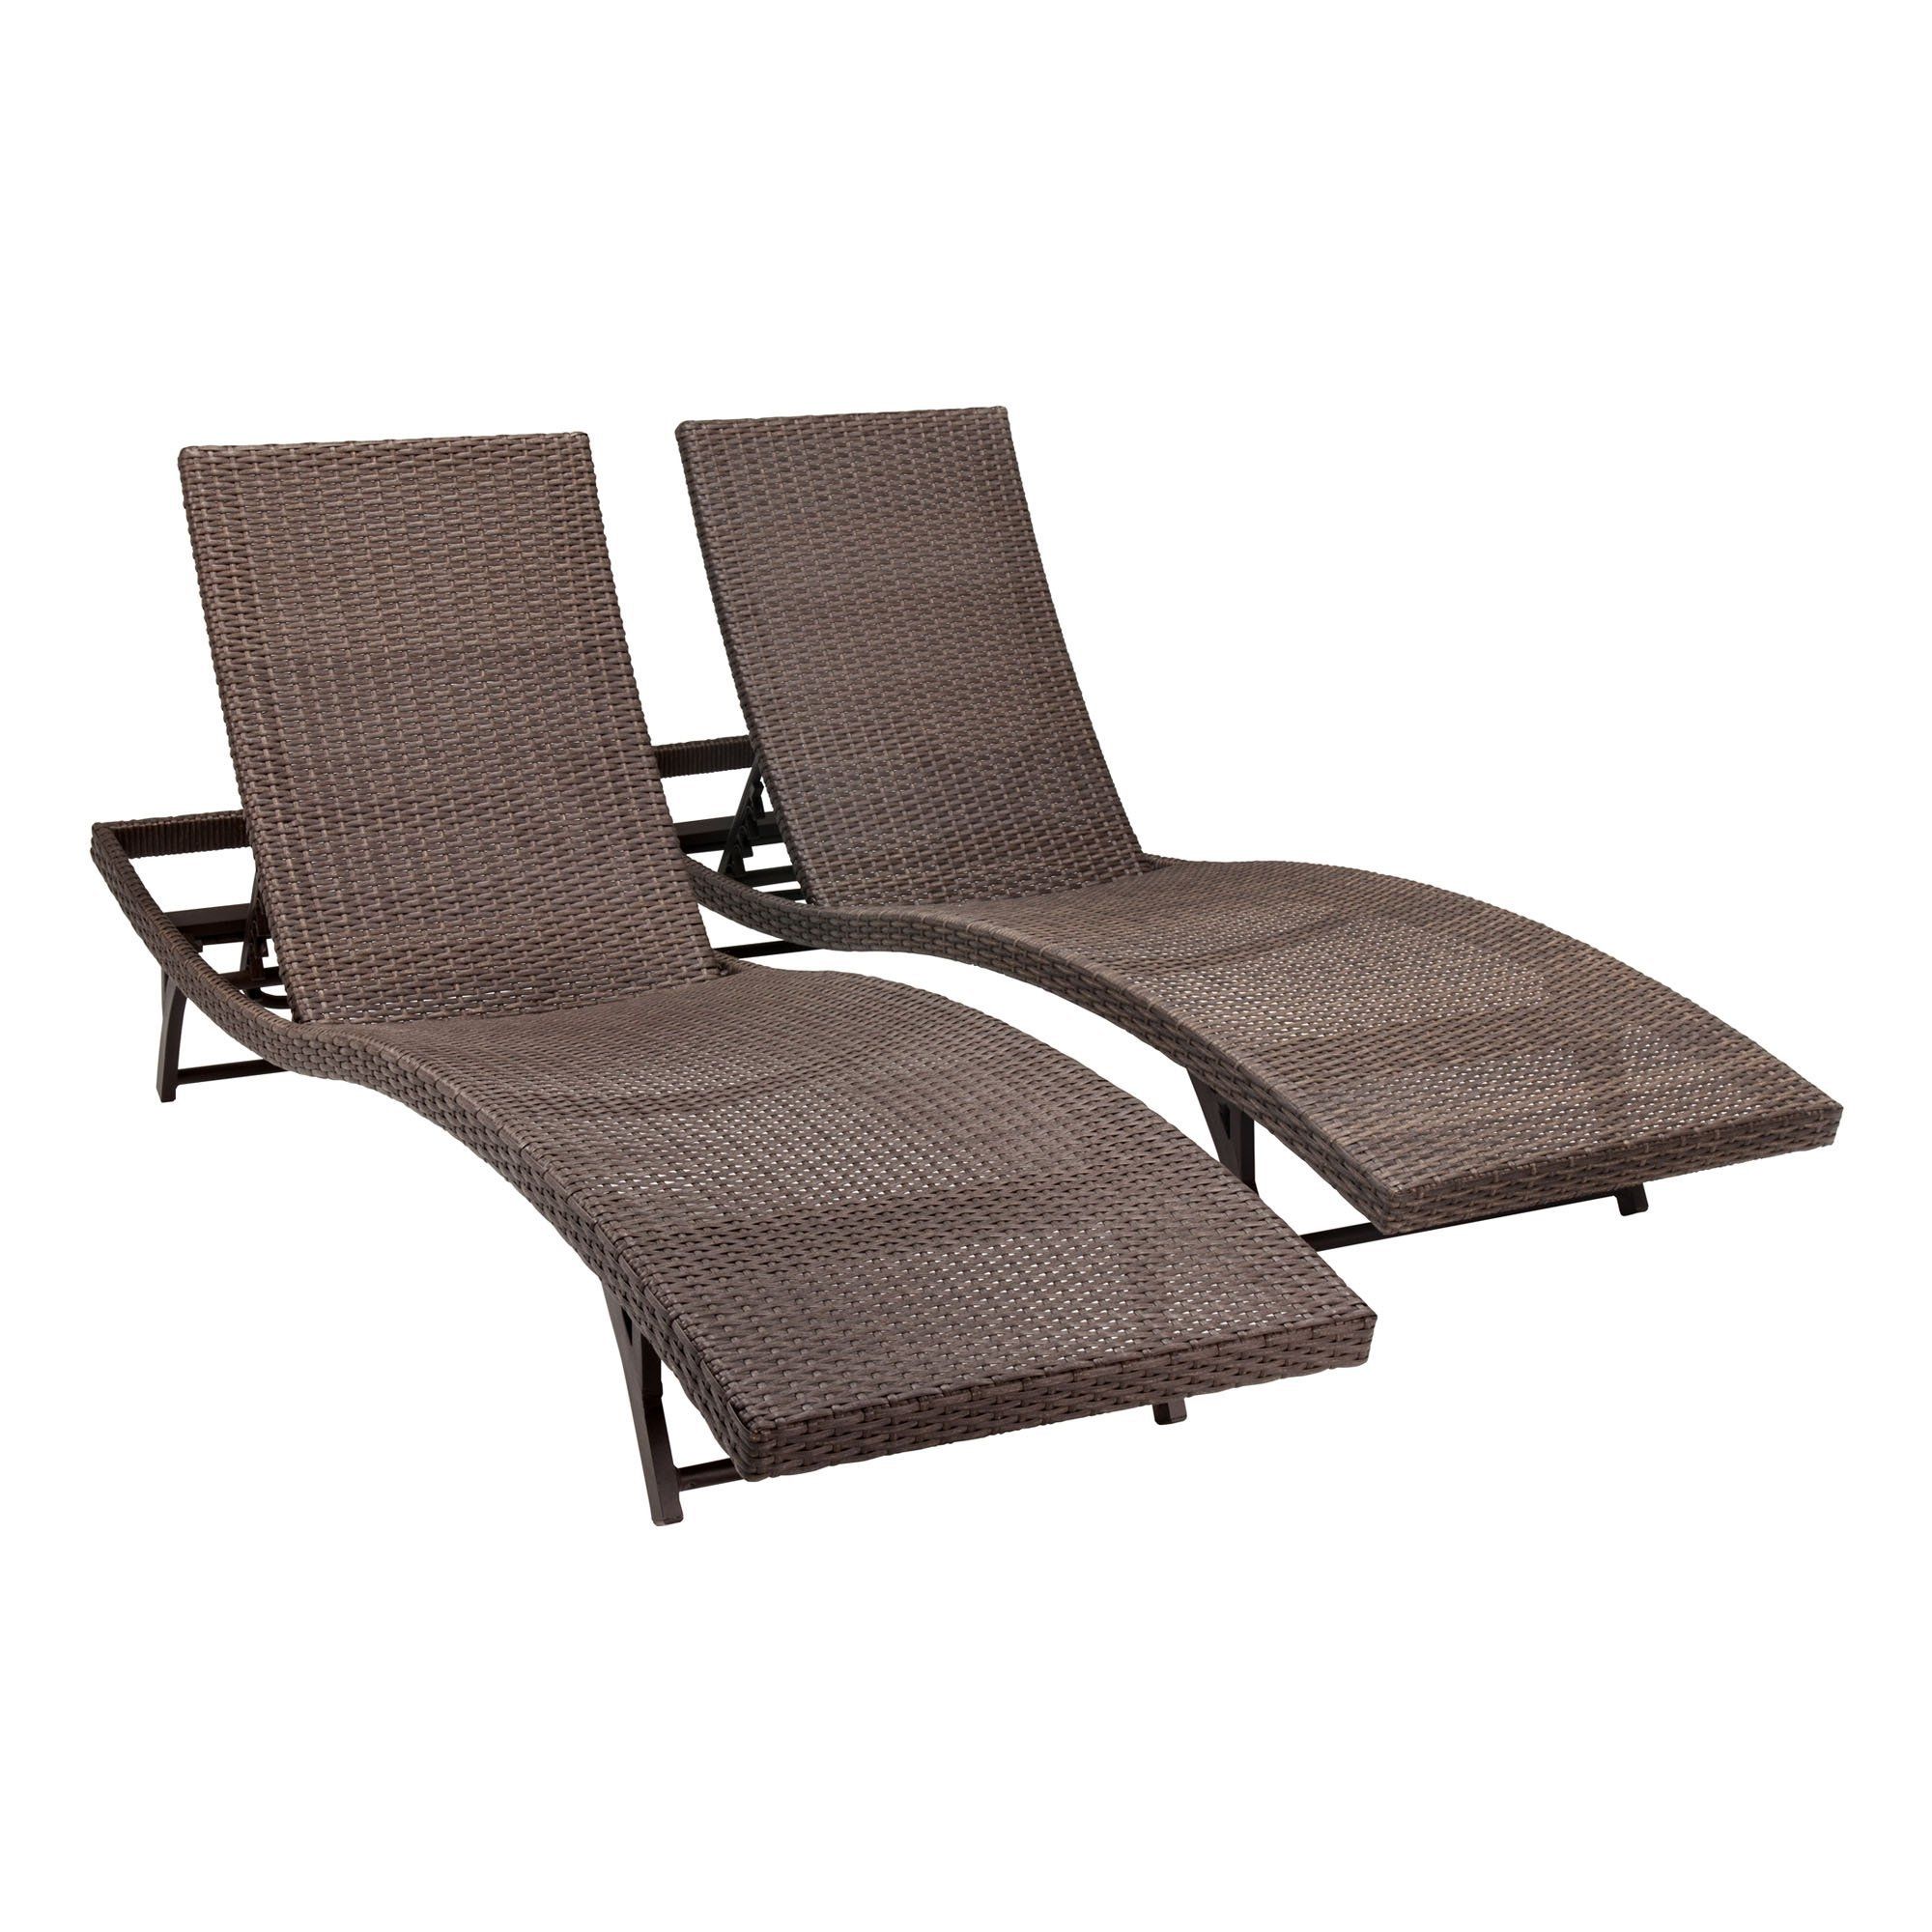 Outdoor Chaise Lounge Chairs Ideas : Best Outdoor Chaise Lounge Pertaining To Well Liked Deck Chaise Lounge Chairs (View 15 of 15)